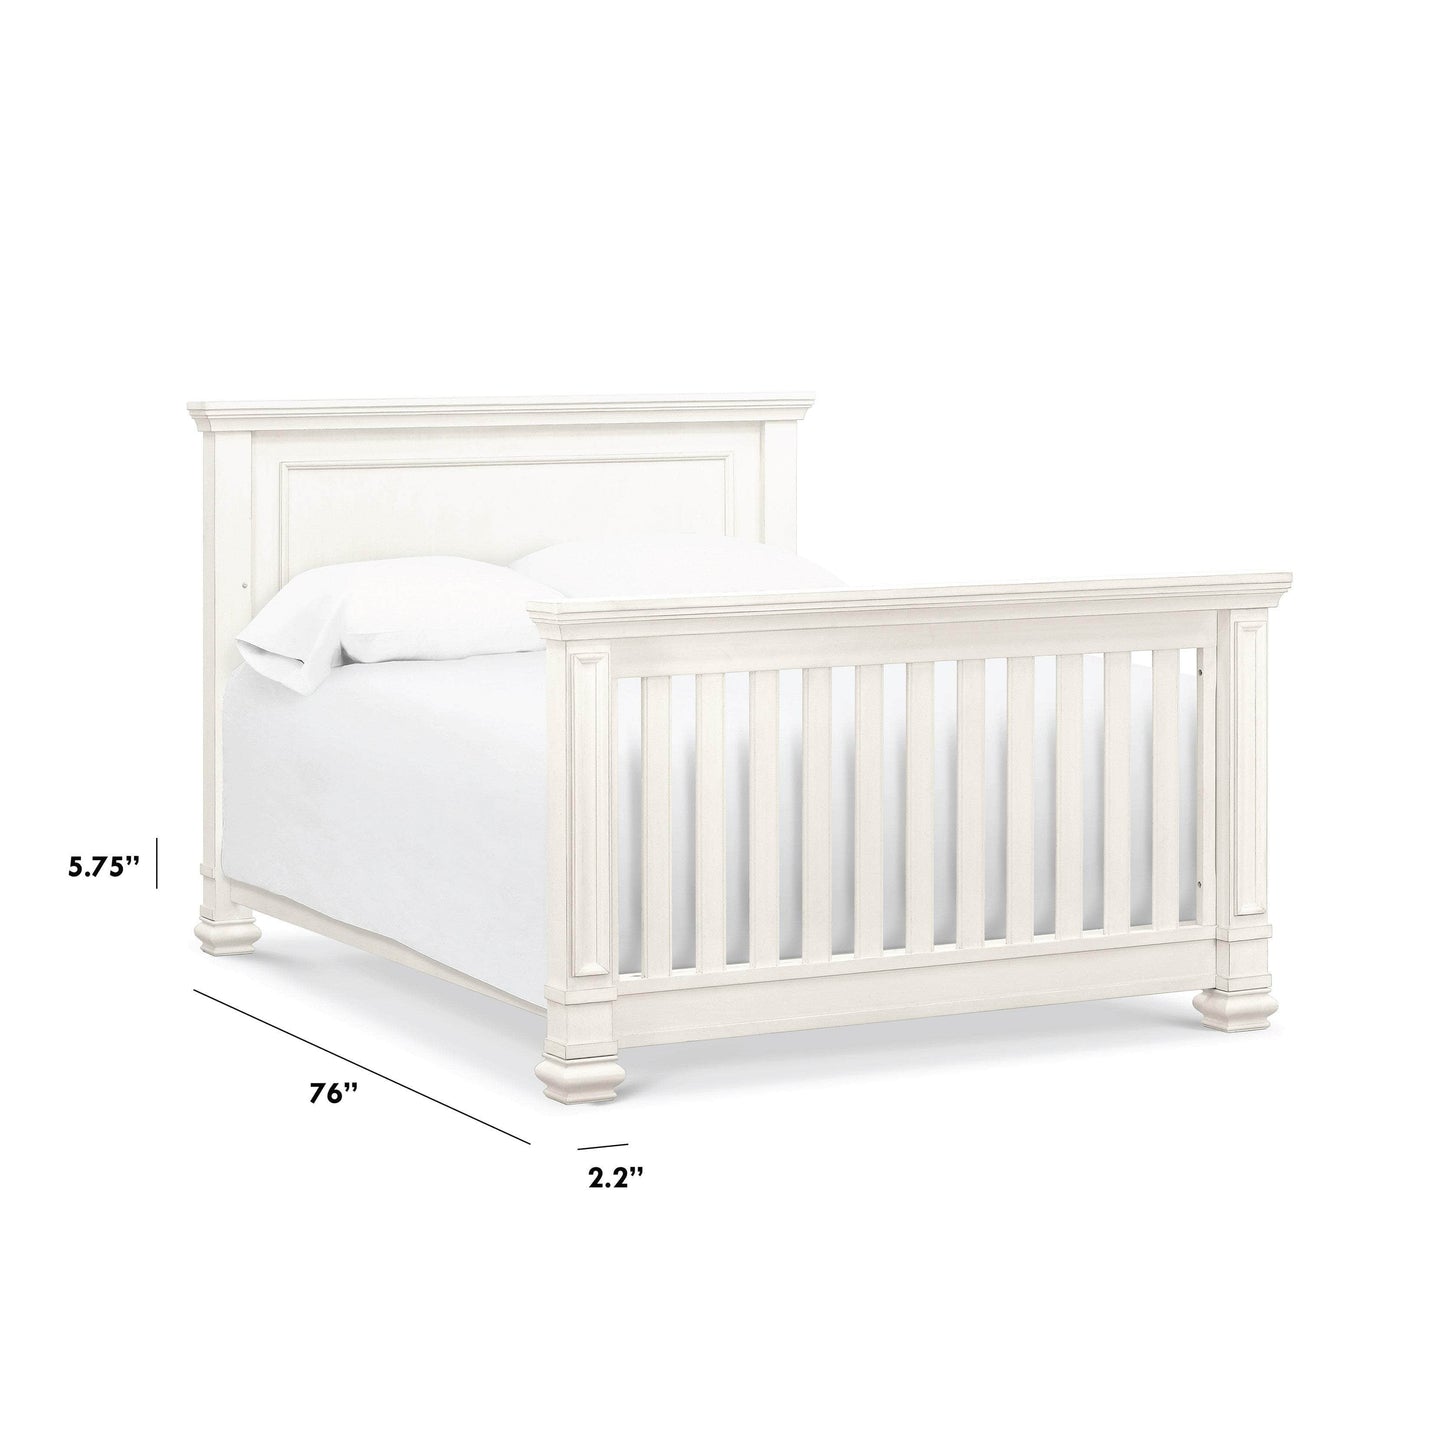 M7689CW,Full Size Bed Conversion Kit in Coastal White